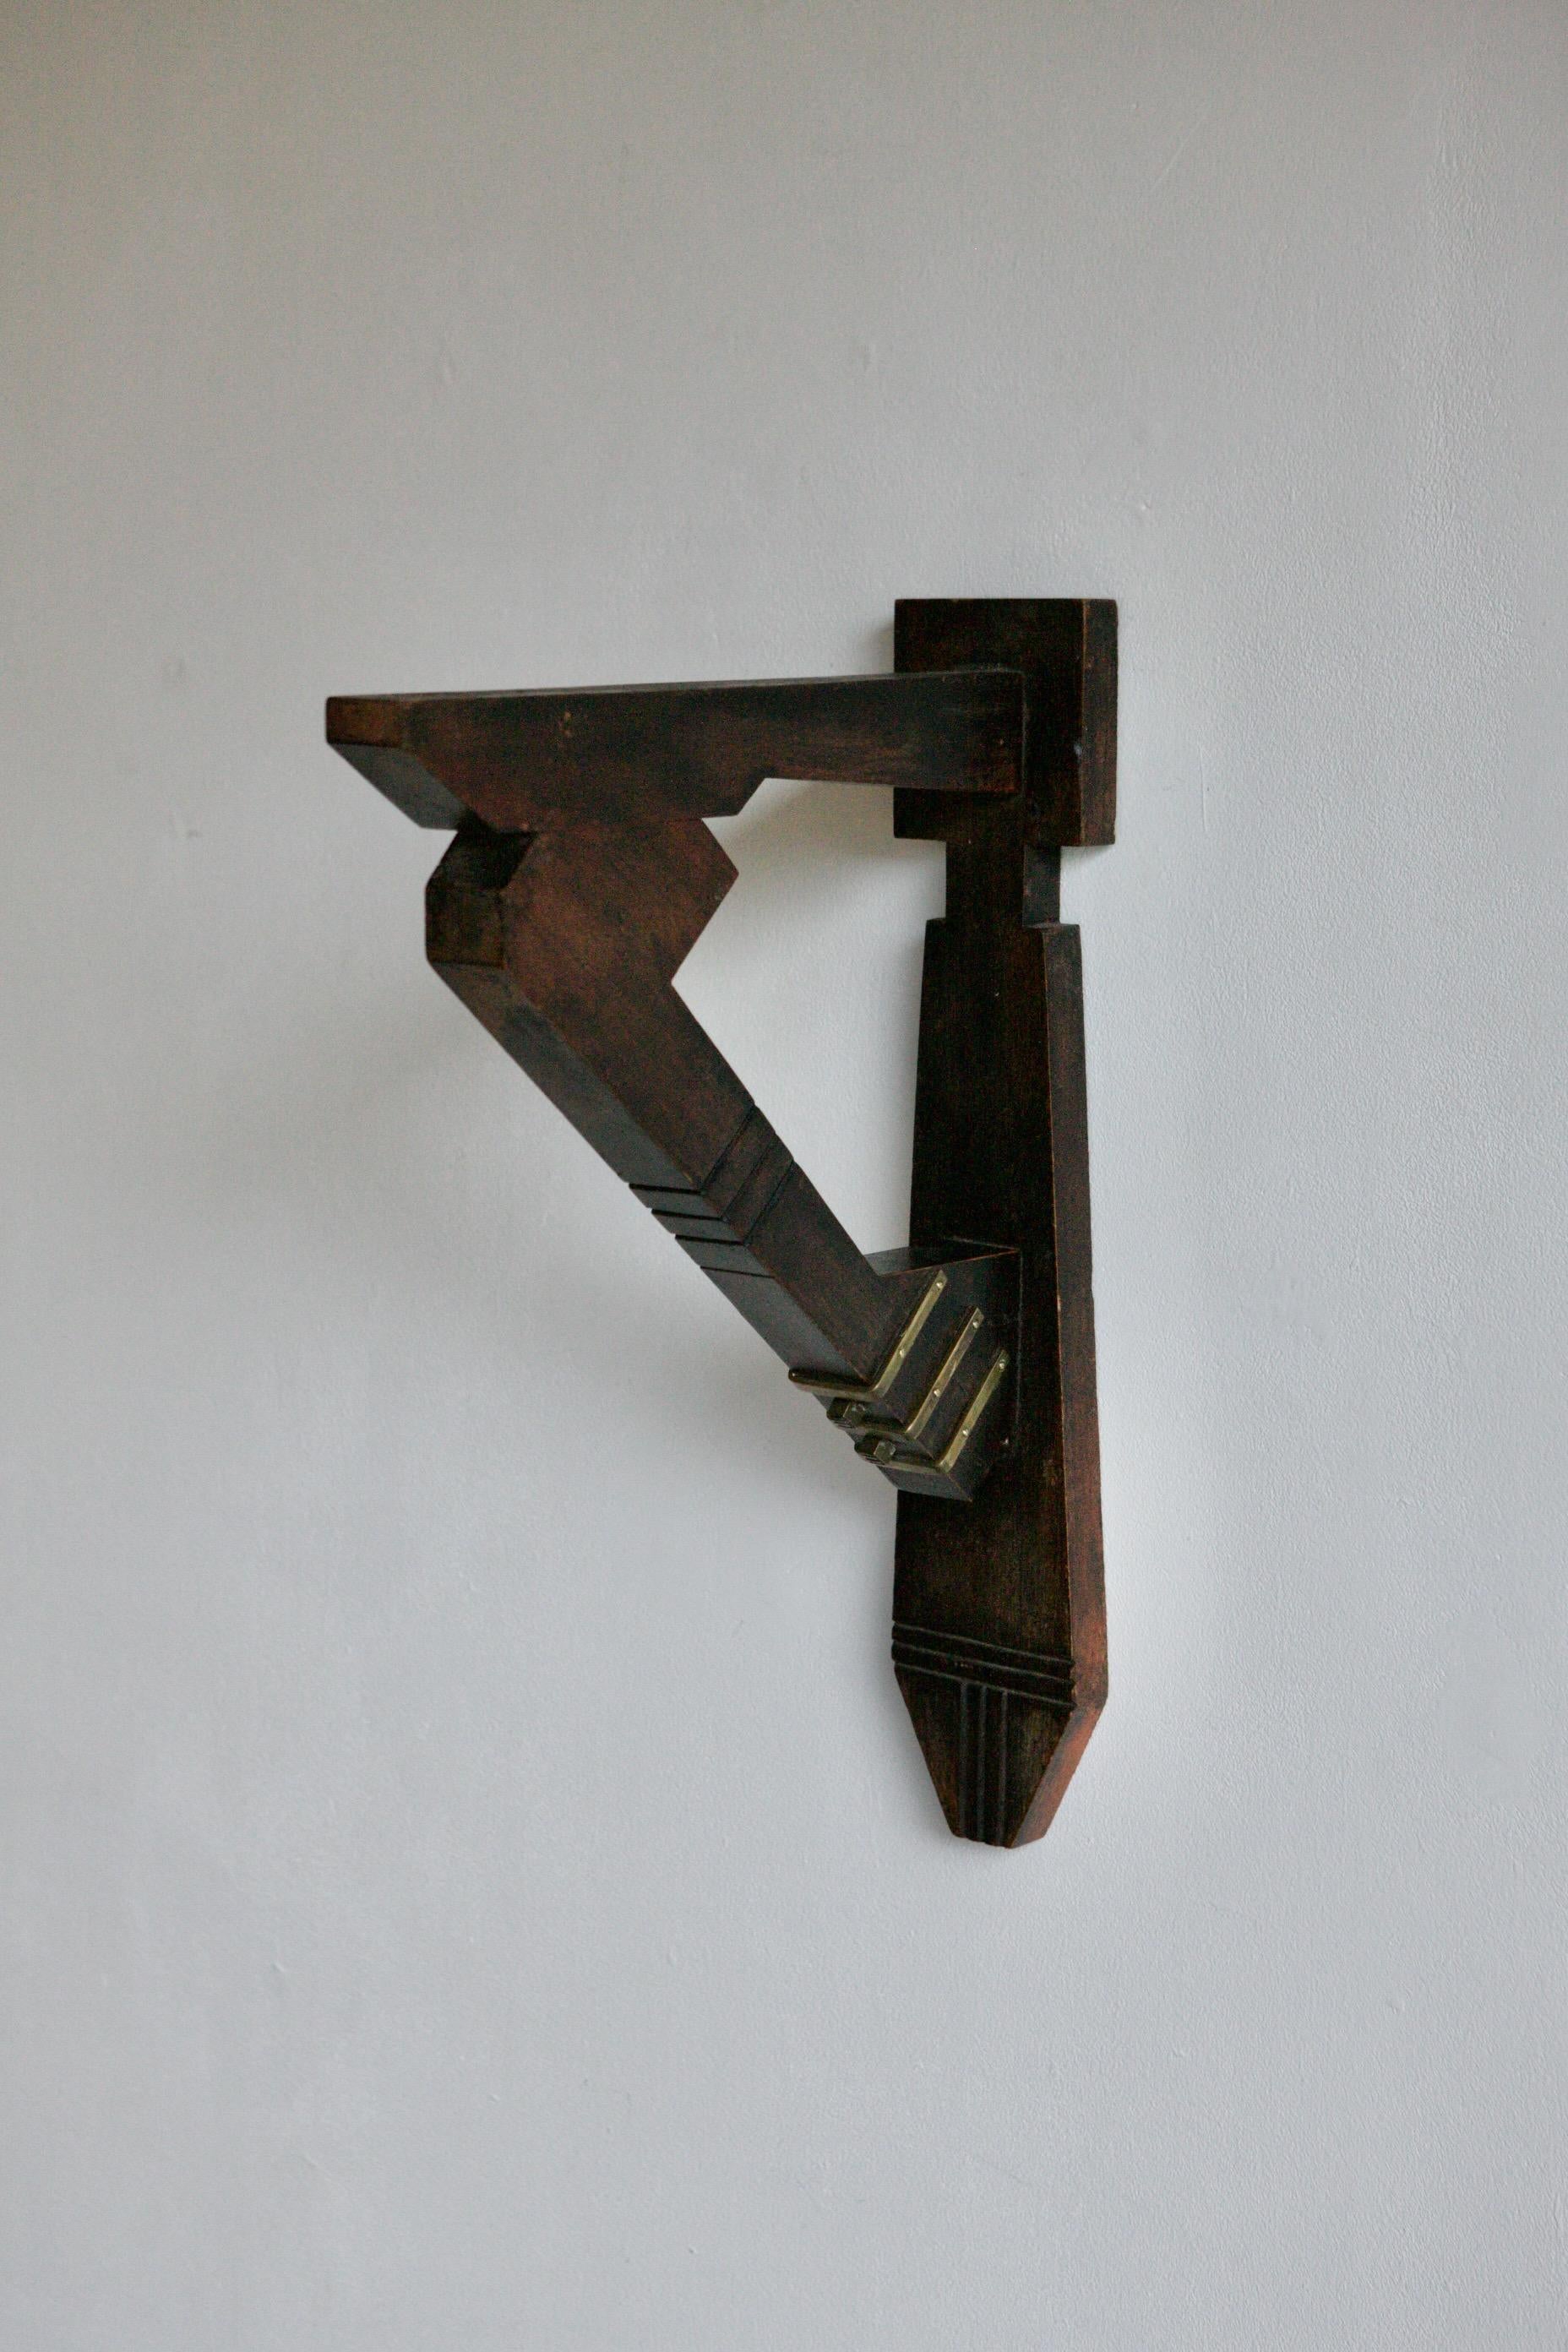 We have for sale two pairs of these incredible wall brackets by Adolphe Petit-Monsigny. A rare find from French Art Deco sculptor who was renowned for his work in brass and other metals. These deep brackets made from mahogany and brass have an